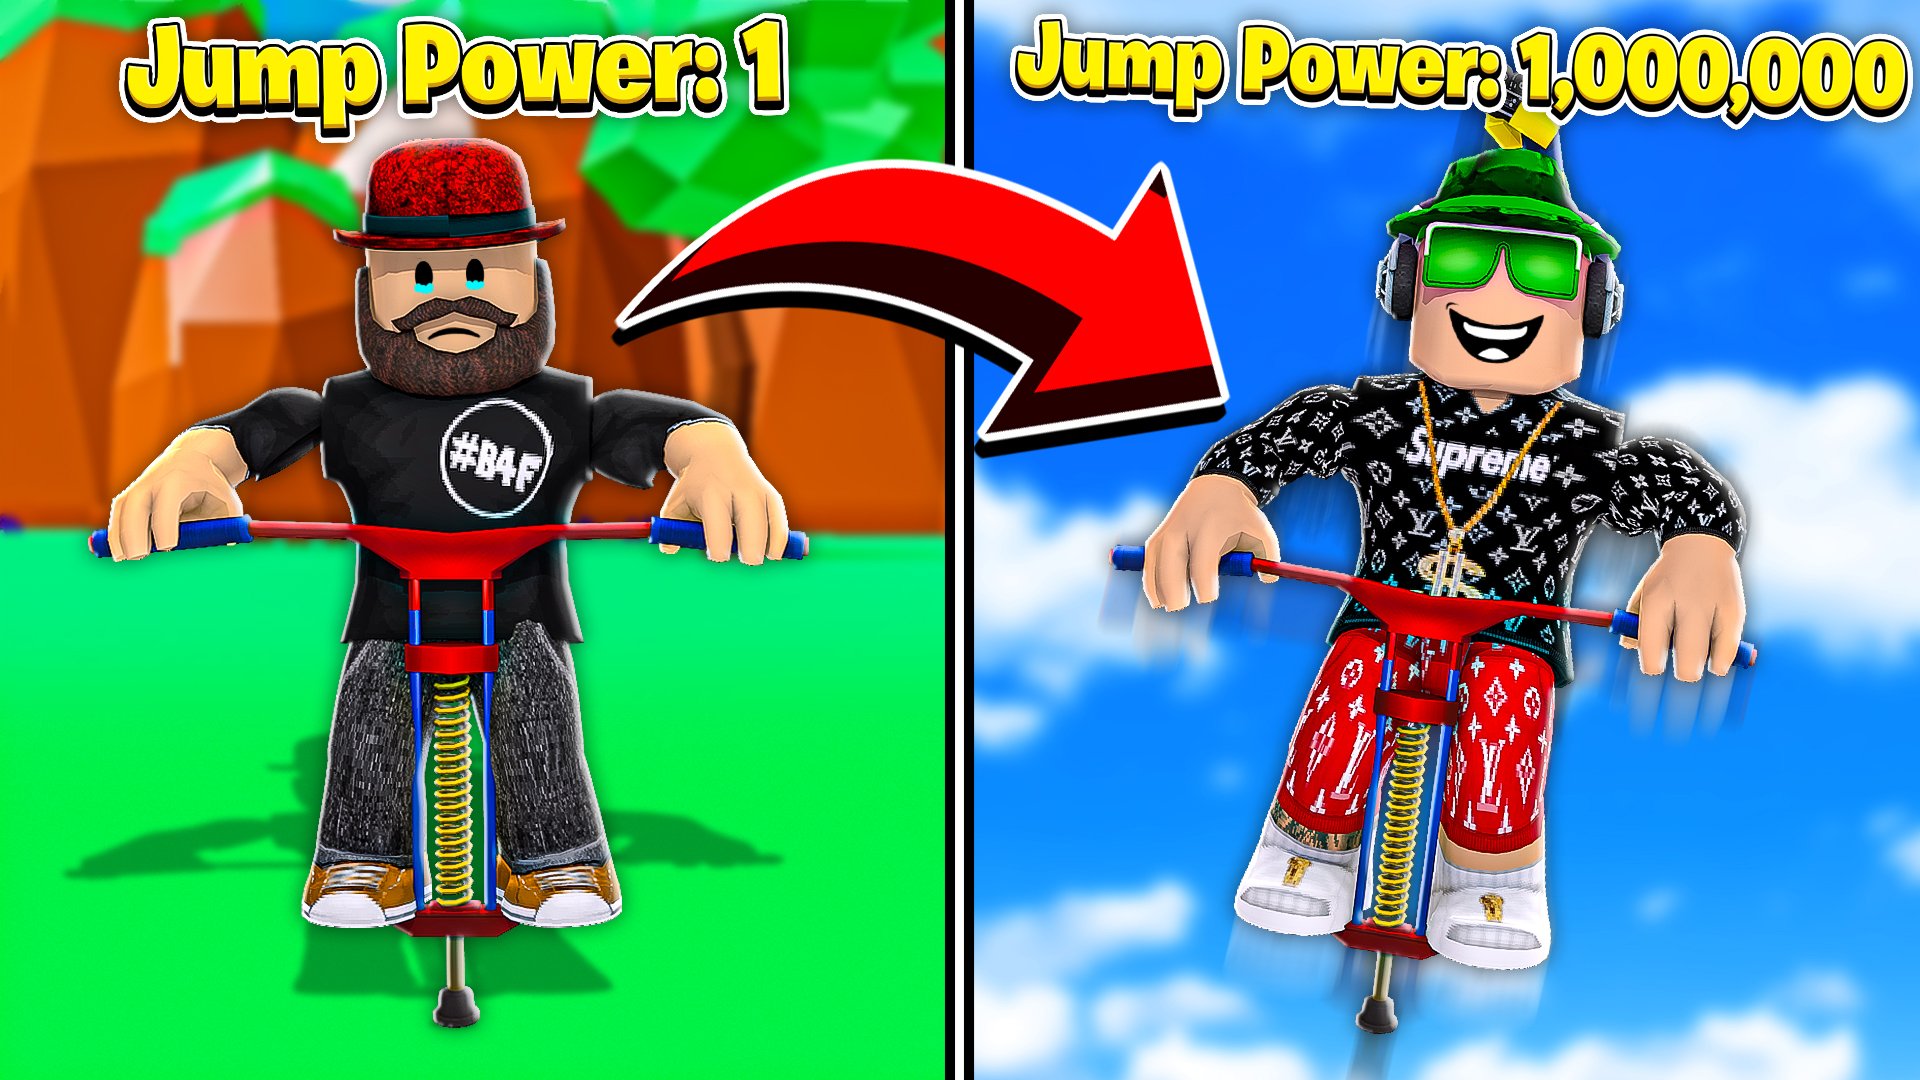 Blox4fun On Twitter Very Fast Way To Reach Max Jumping Power In Roblox Pogo Simulator Https T Co Y2cnqs4zi6 Youtubegaming - blox4fun on twitter i have super speed in roblox dashing simulator https t co eci6r7mhos shoutgamers gamersunite gamerretweeters gamerrter youtubegaming youtube https t co 1gcgisryip